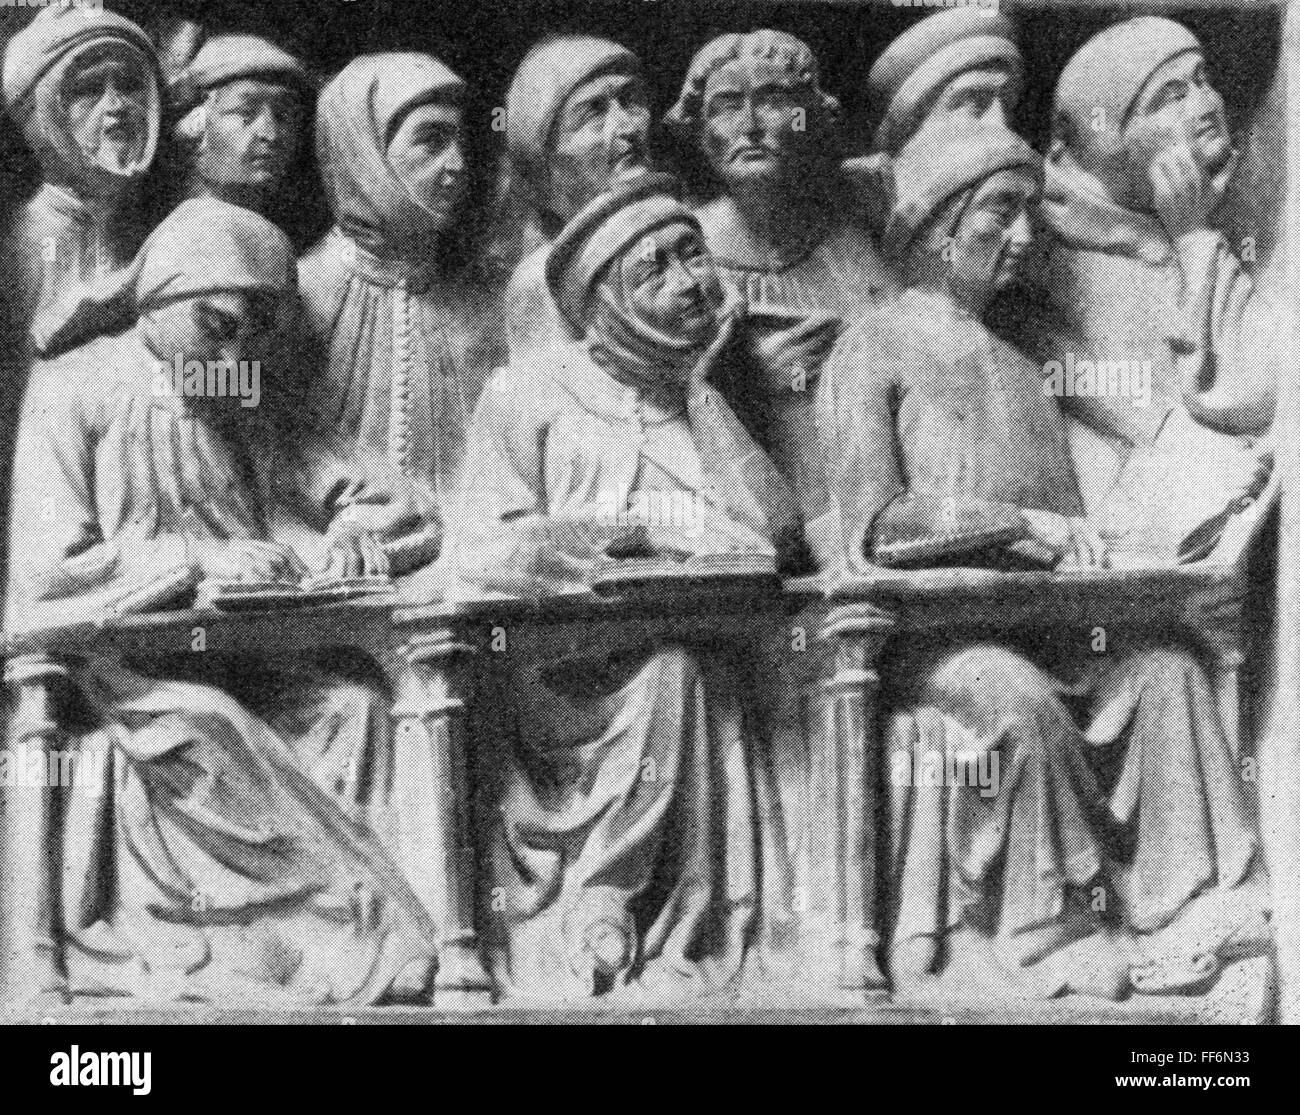 pedagogy,students,Bolognese students attending a lecture,relief,marble,tomb of Giovanni da Legnano,by Jacobello and Pietro Paolo dalle Masegne,14th century,Museo Civico Medievale,Bologna,14th century,Middle Ages,medieval,mediaeval,university,universities,half length,sitting,sit,standing,lessons,listener,listeners,hearer,hearers,listening,listen,table,tables,writing,class,lecture,classes,lectures,courses,in-service course,audience,audiences,pedagogy,paedagogy,education,students,student,tomb,tombs,historic,historical,,Additional-Rights-Clearences-Not Available Stock Photo